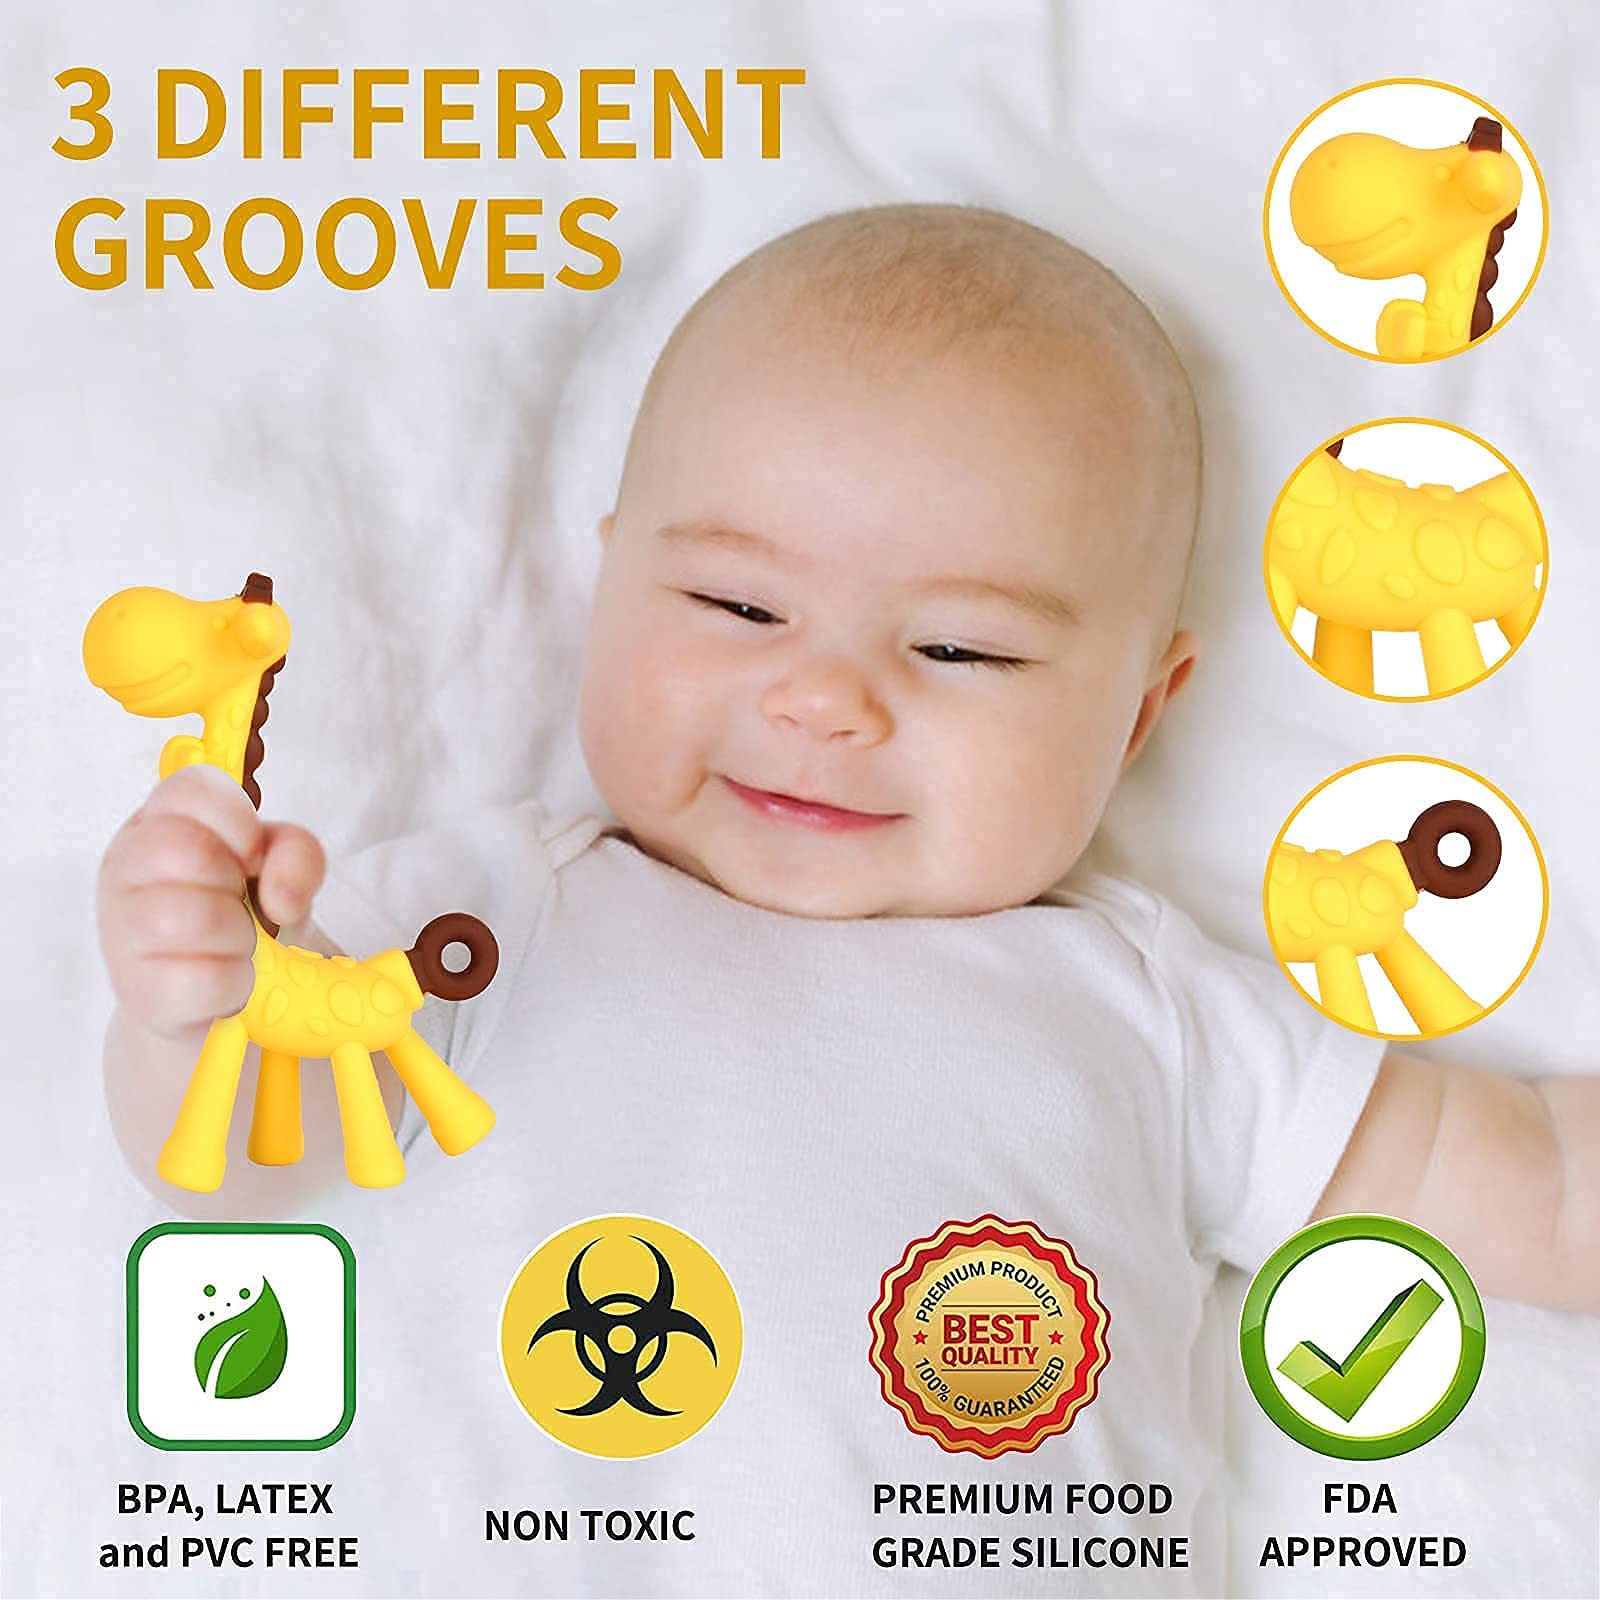 HAILI XMGQ Baby Teething Toys, Silicone Teether Freezer BPA Free, Soothe Babies Relief Sore Gums, Banana Finger Toothbrush, Fruit Shape Giraffe Set for Infant Boys and Girls